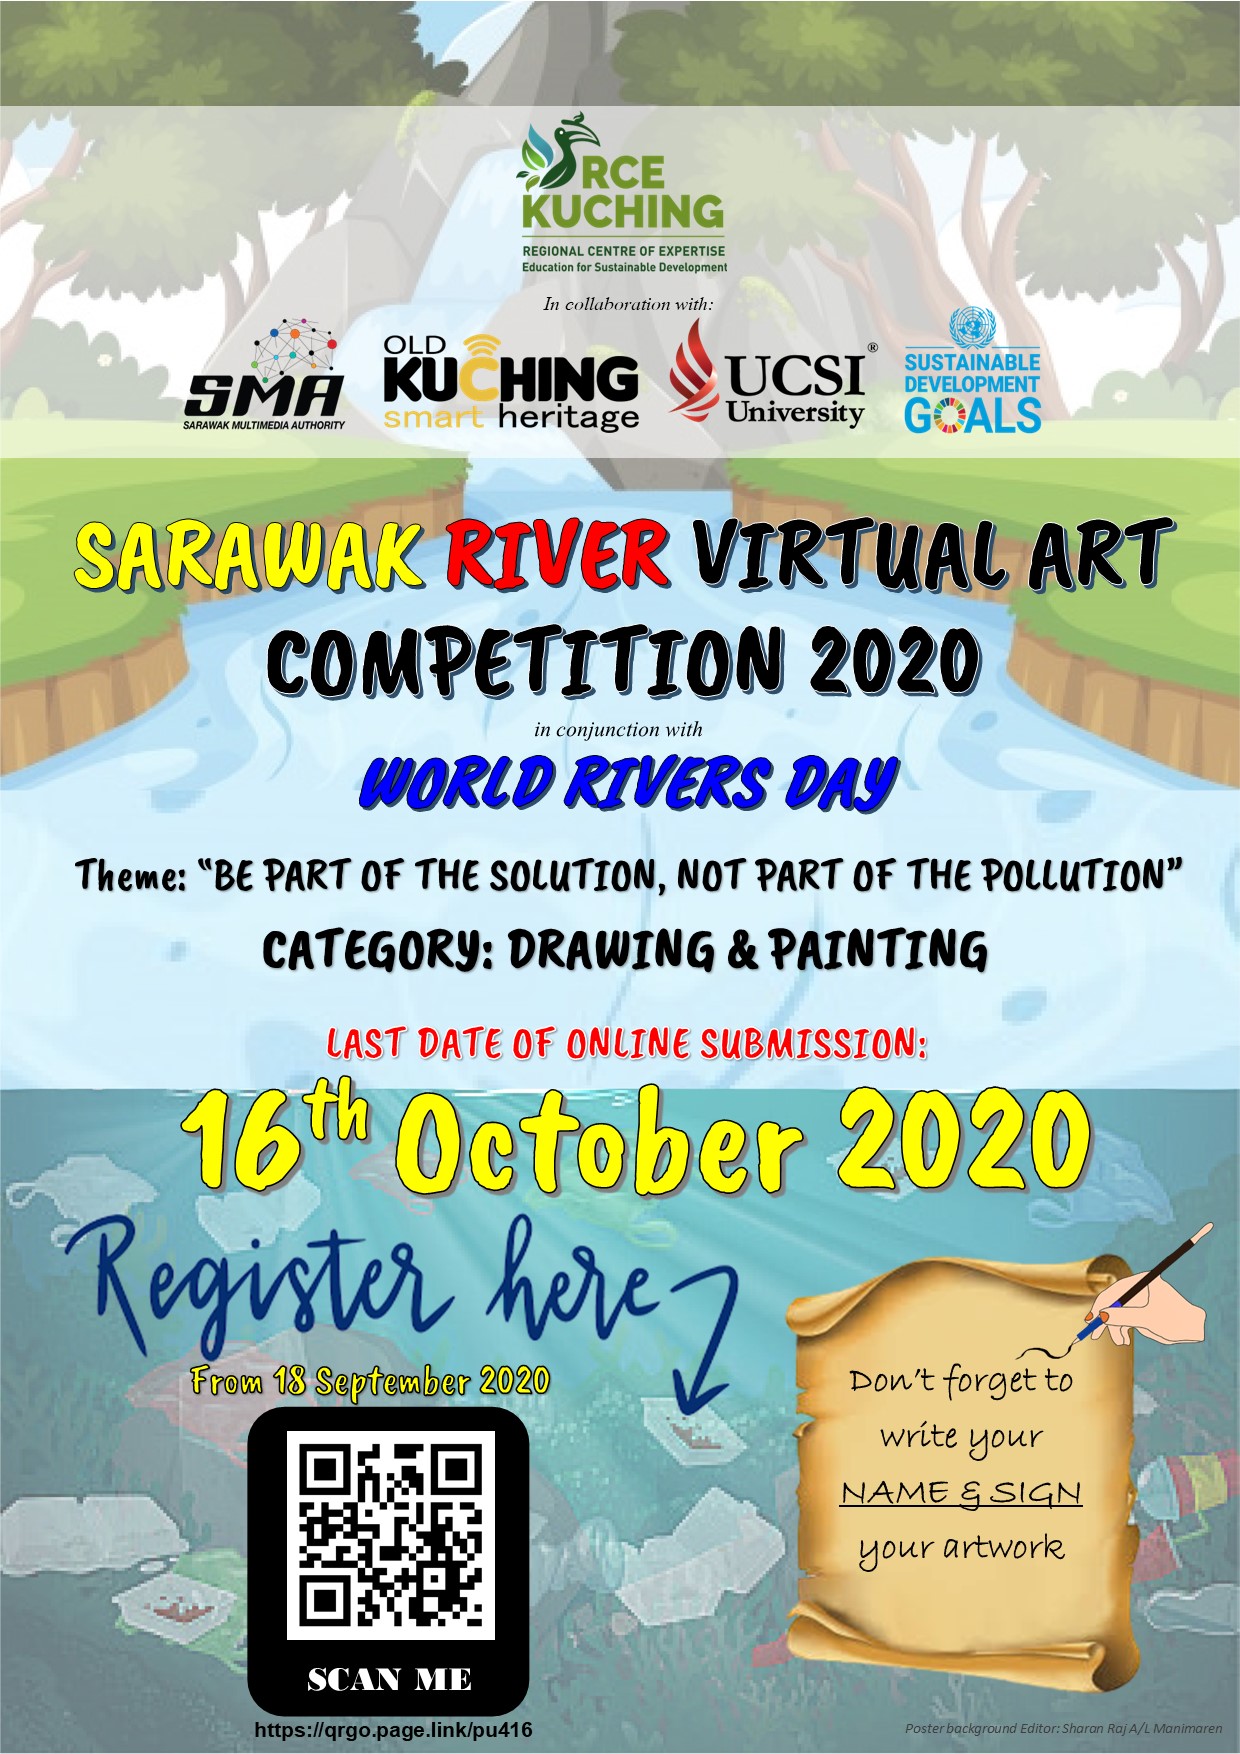 You are currently viewing Sarawak River Virtual Art Competition 2020